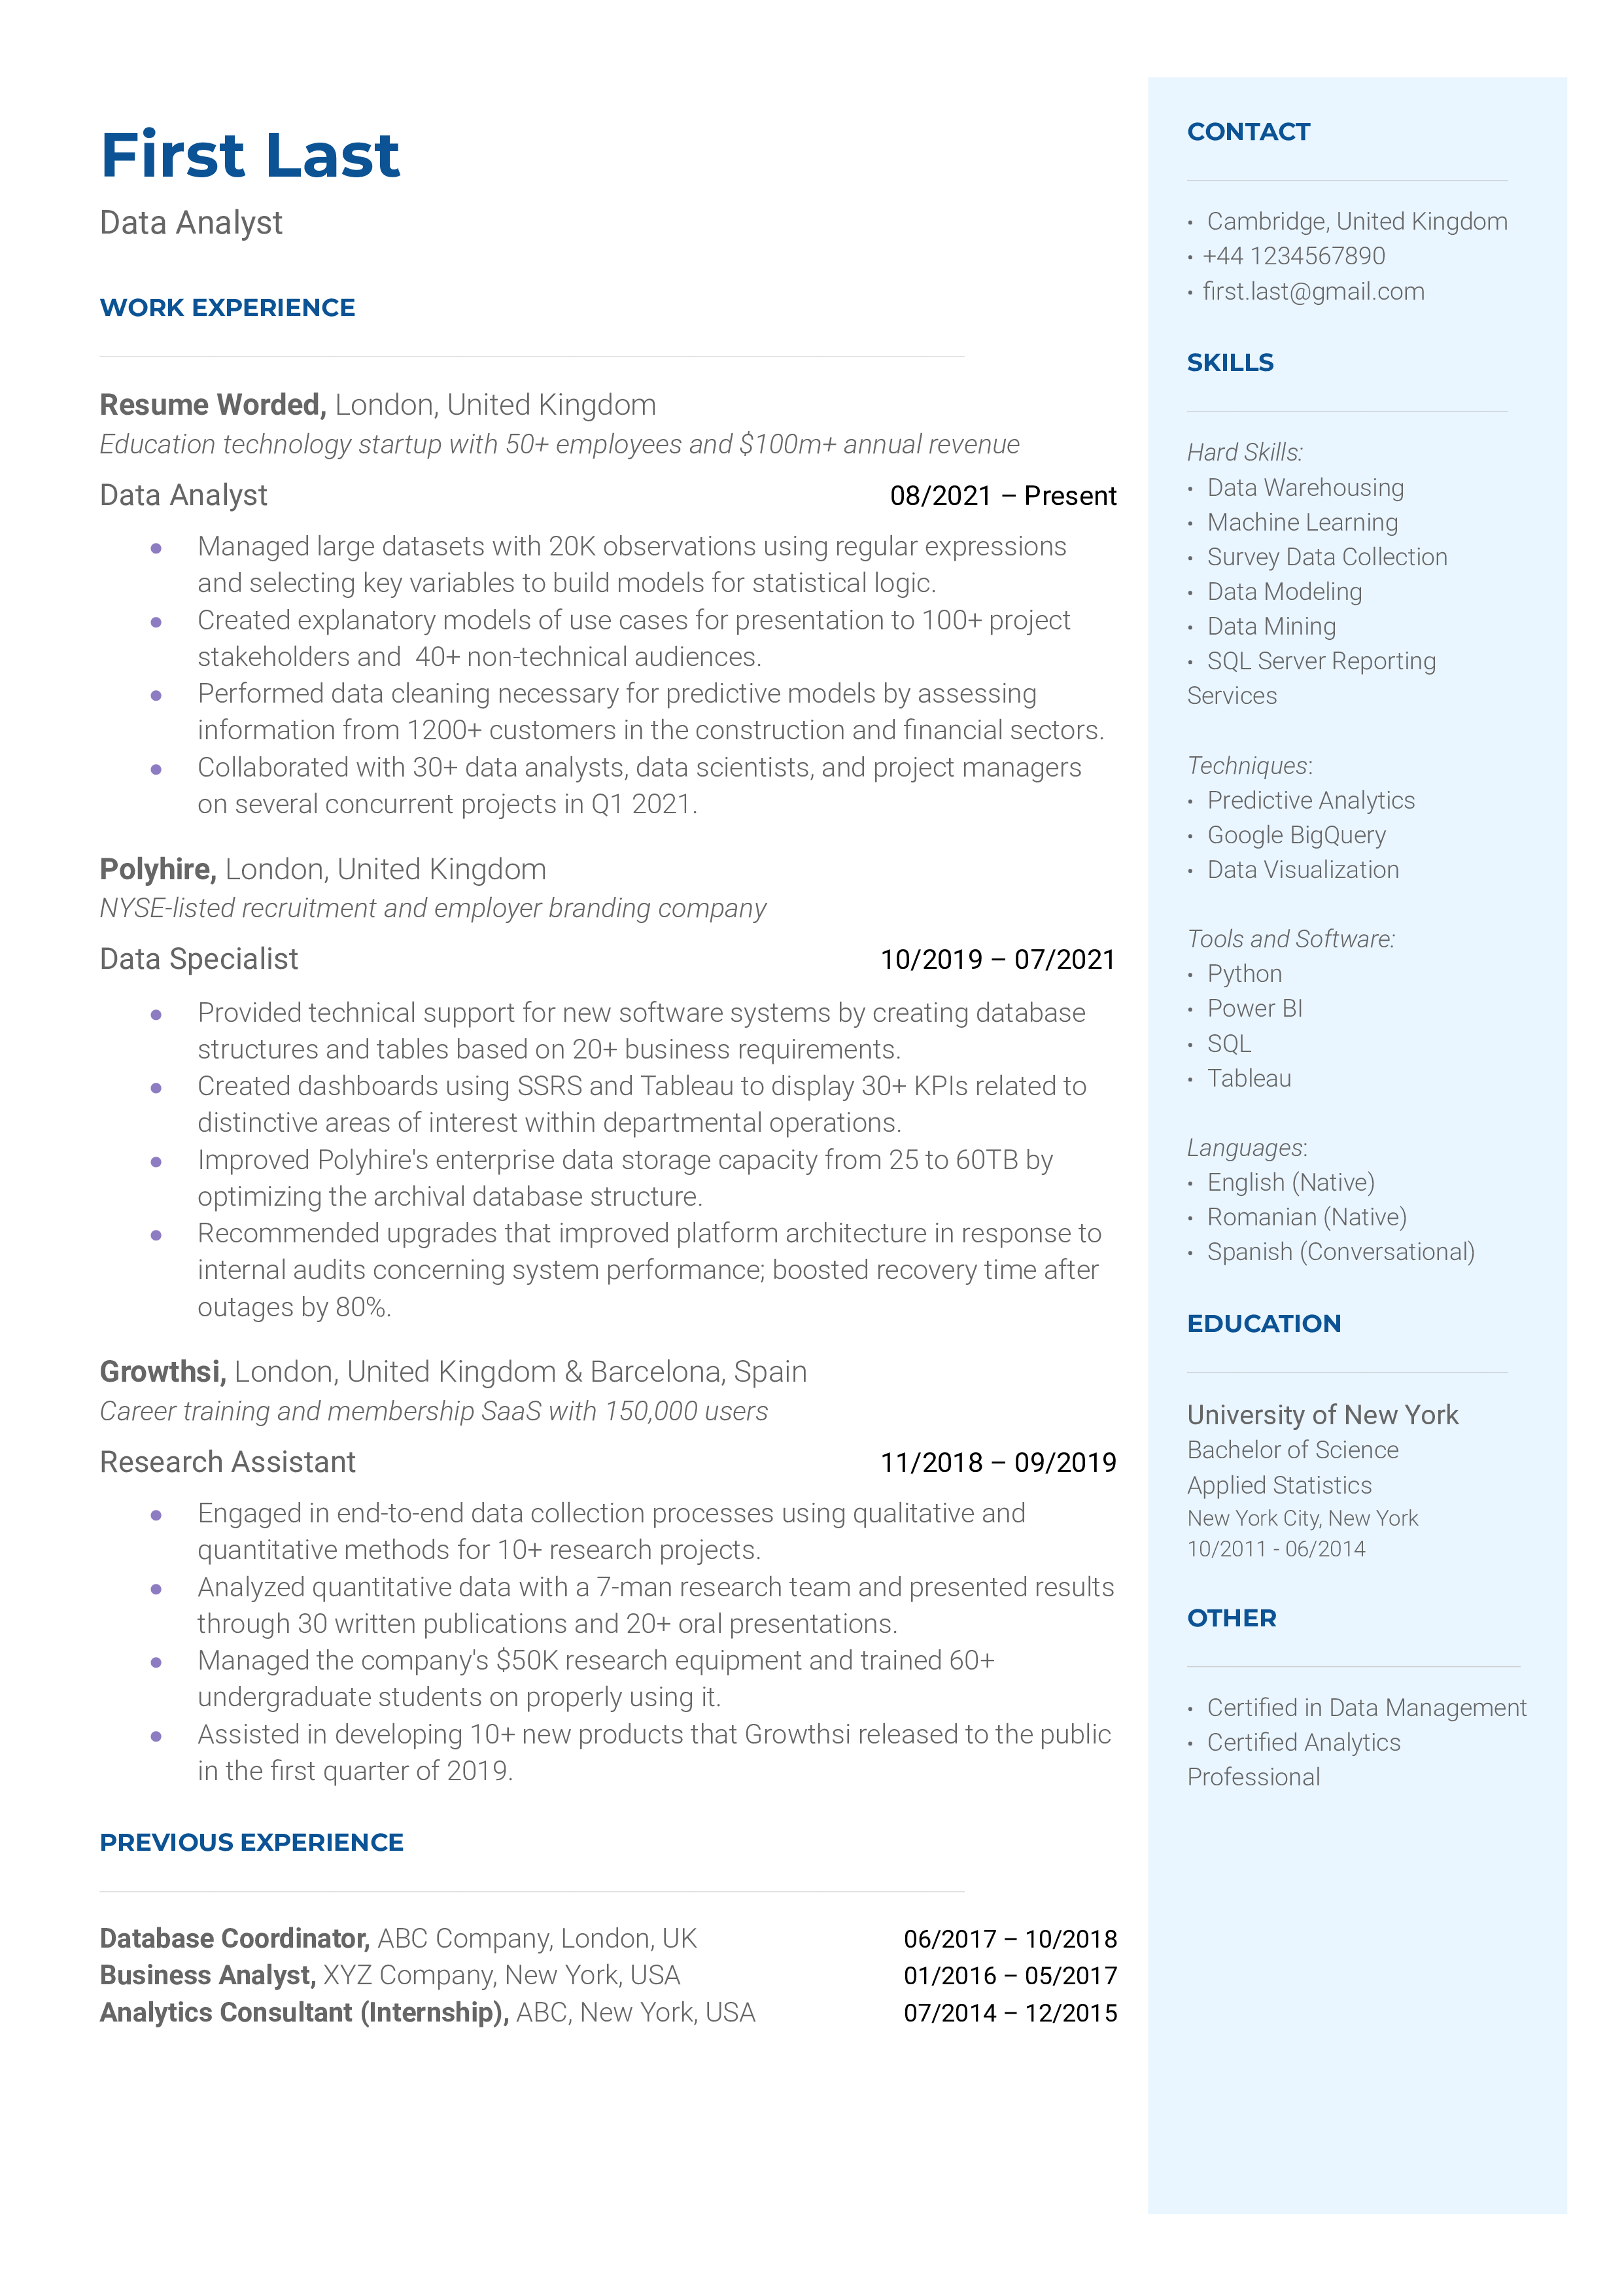 A data analyst resume template including data analysis certifications.